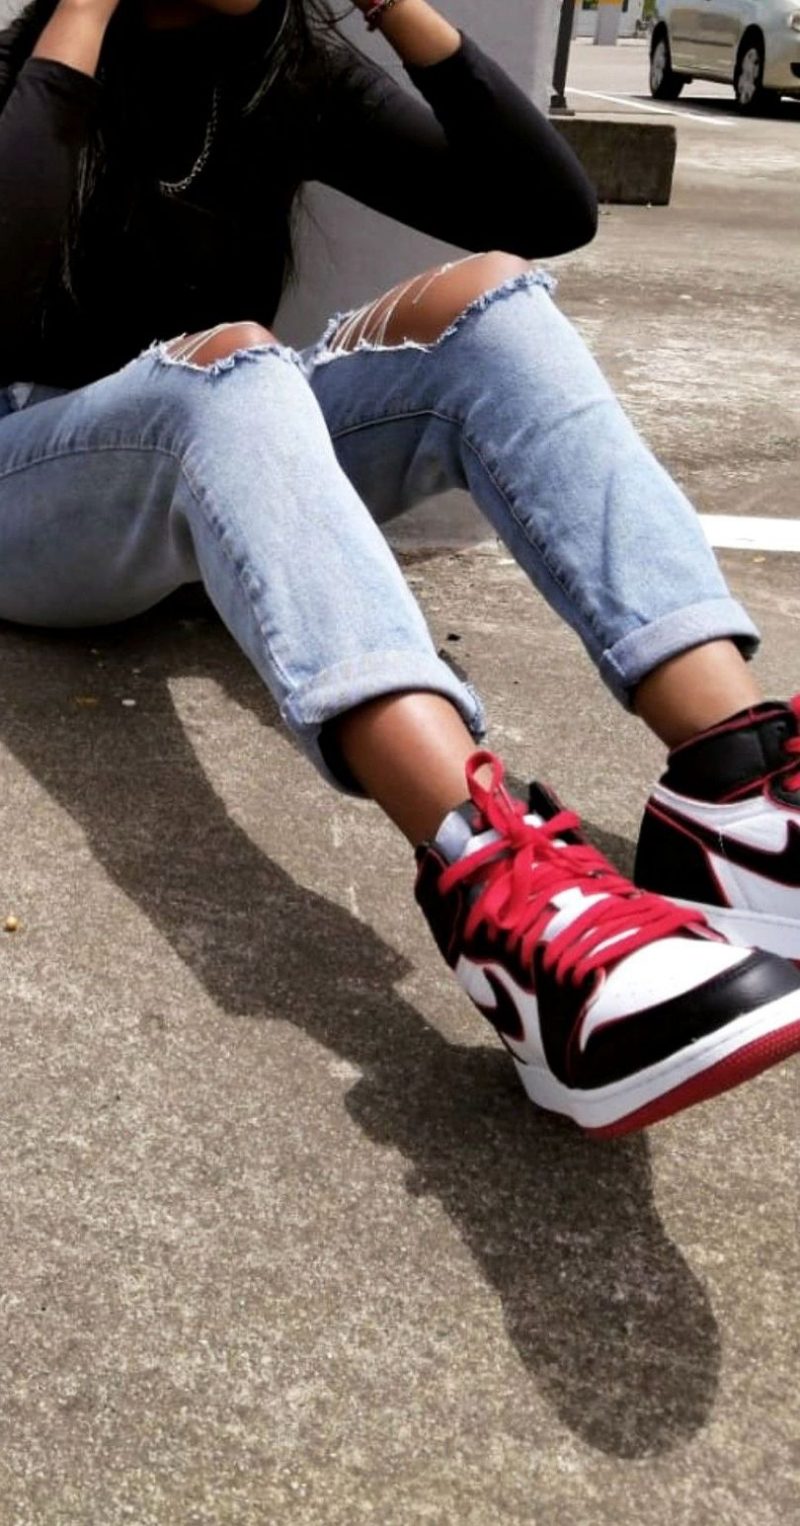 Best Sneakers For Women To Wear On The Streets 2022